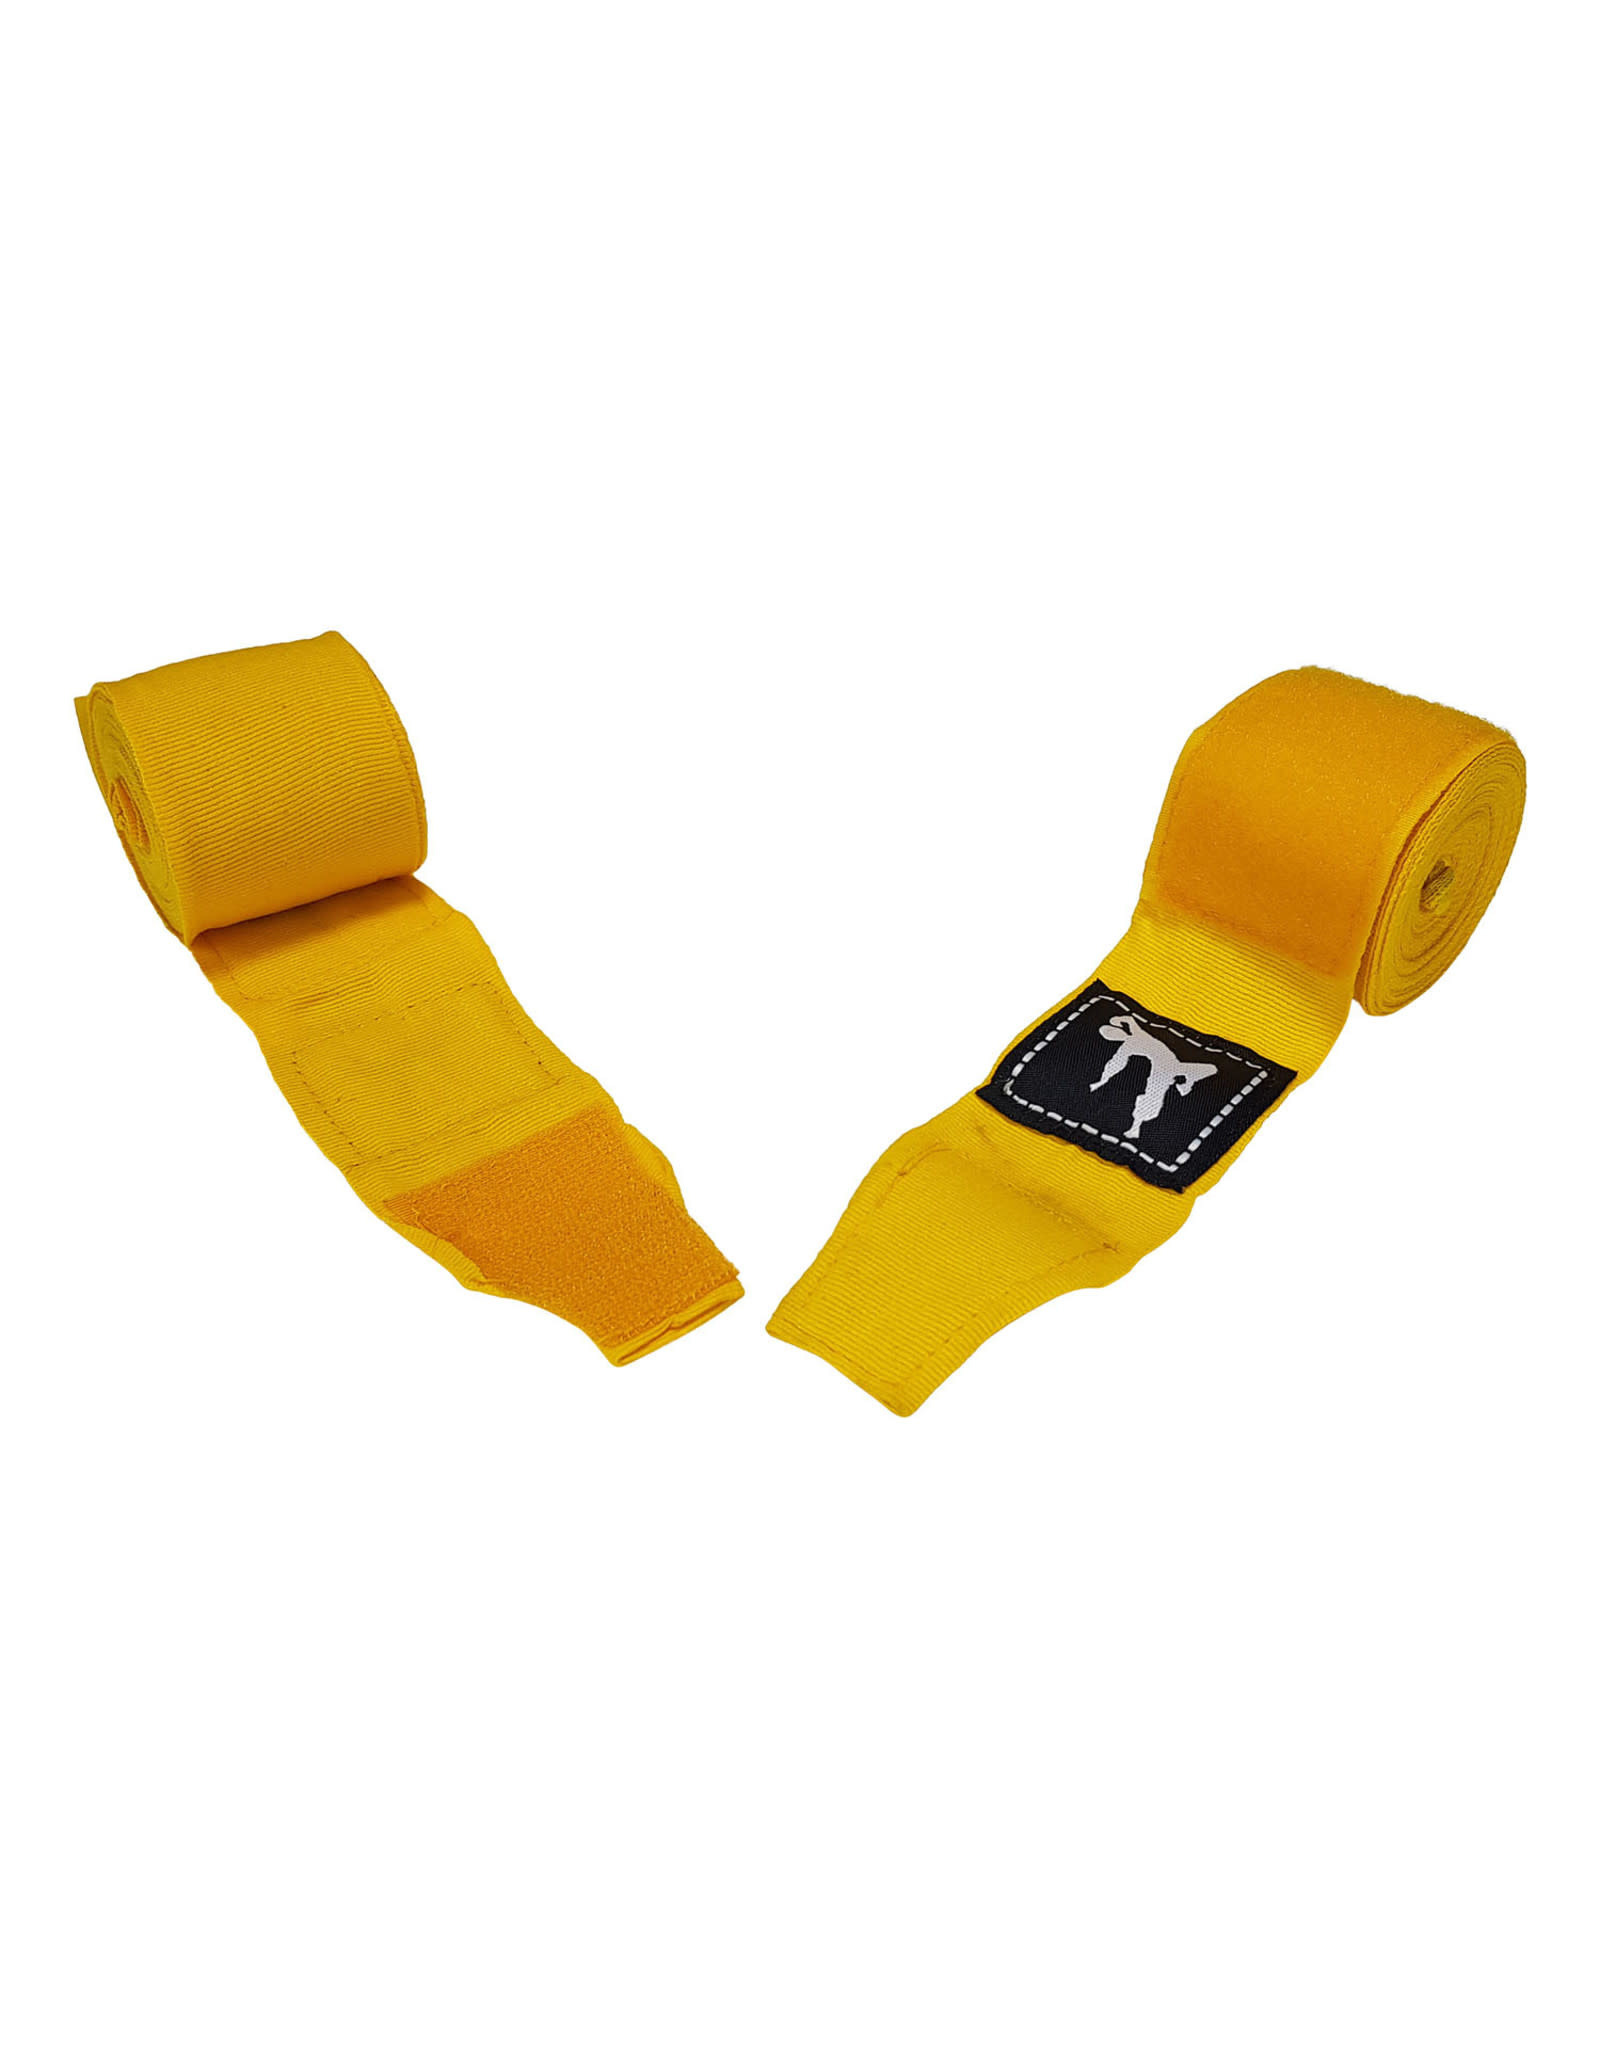 Bruce Lee Boxing Wraps Yellow 250 of 450 cm